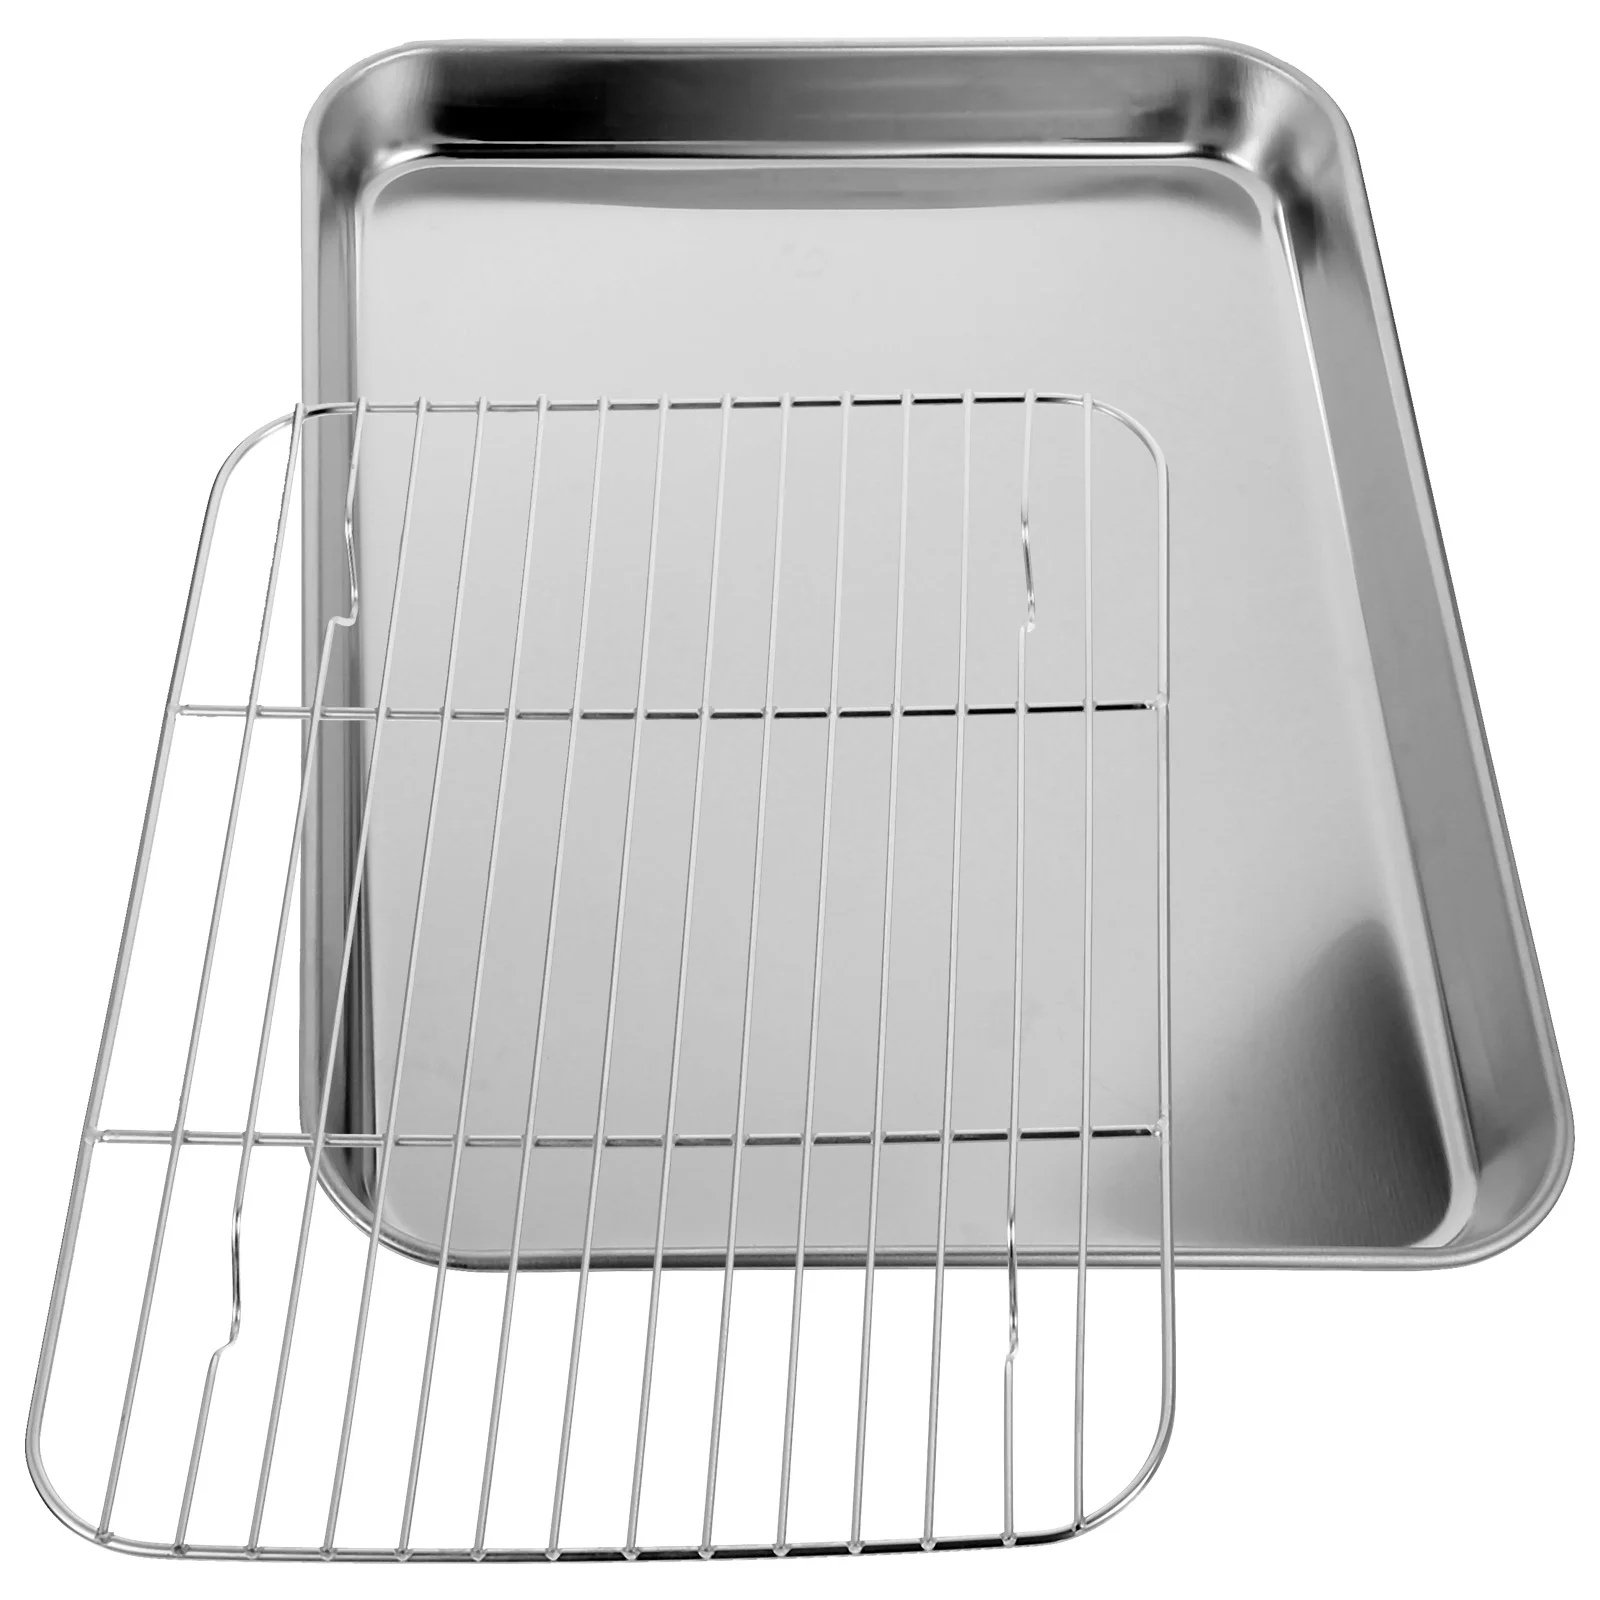 

2 Sets Sheet with Rack Set Stainless Steel Pans with Cooling Racks Rectangular Cookie Sheet Pan Serving Platter Tray for Oven